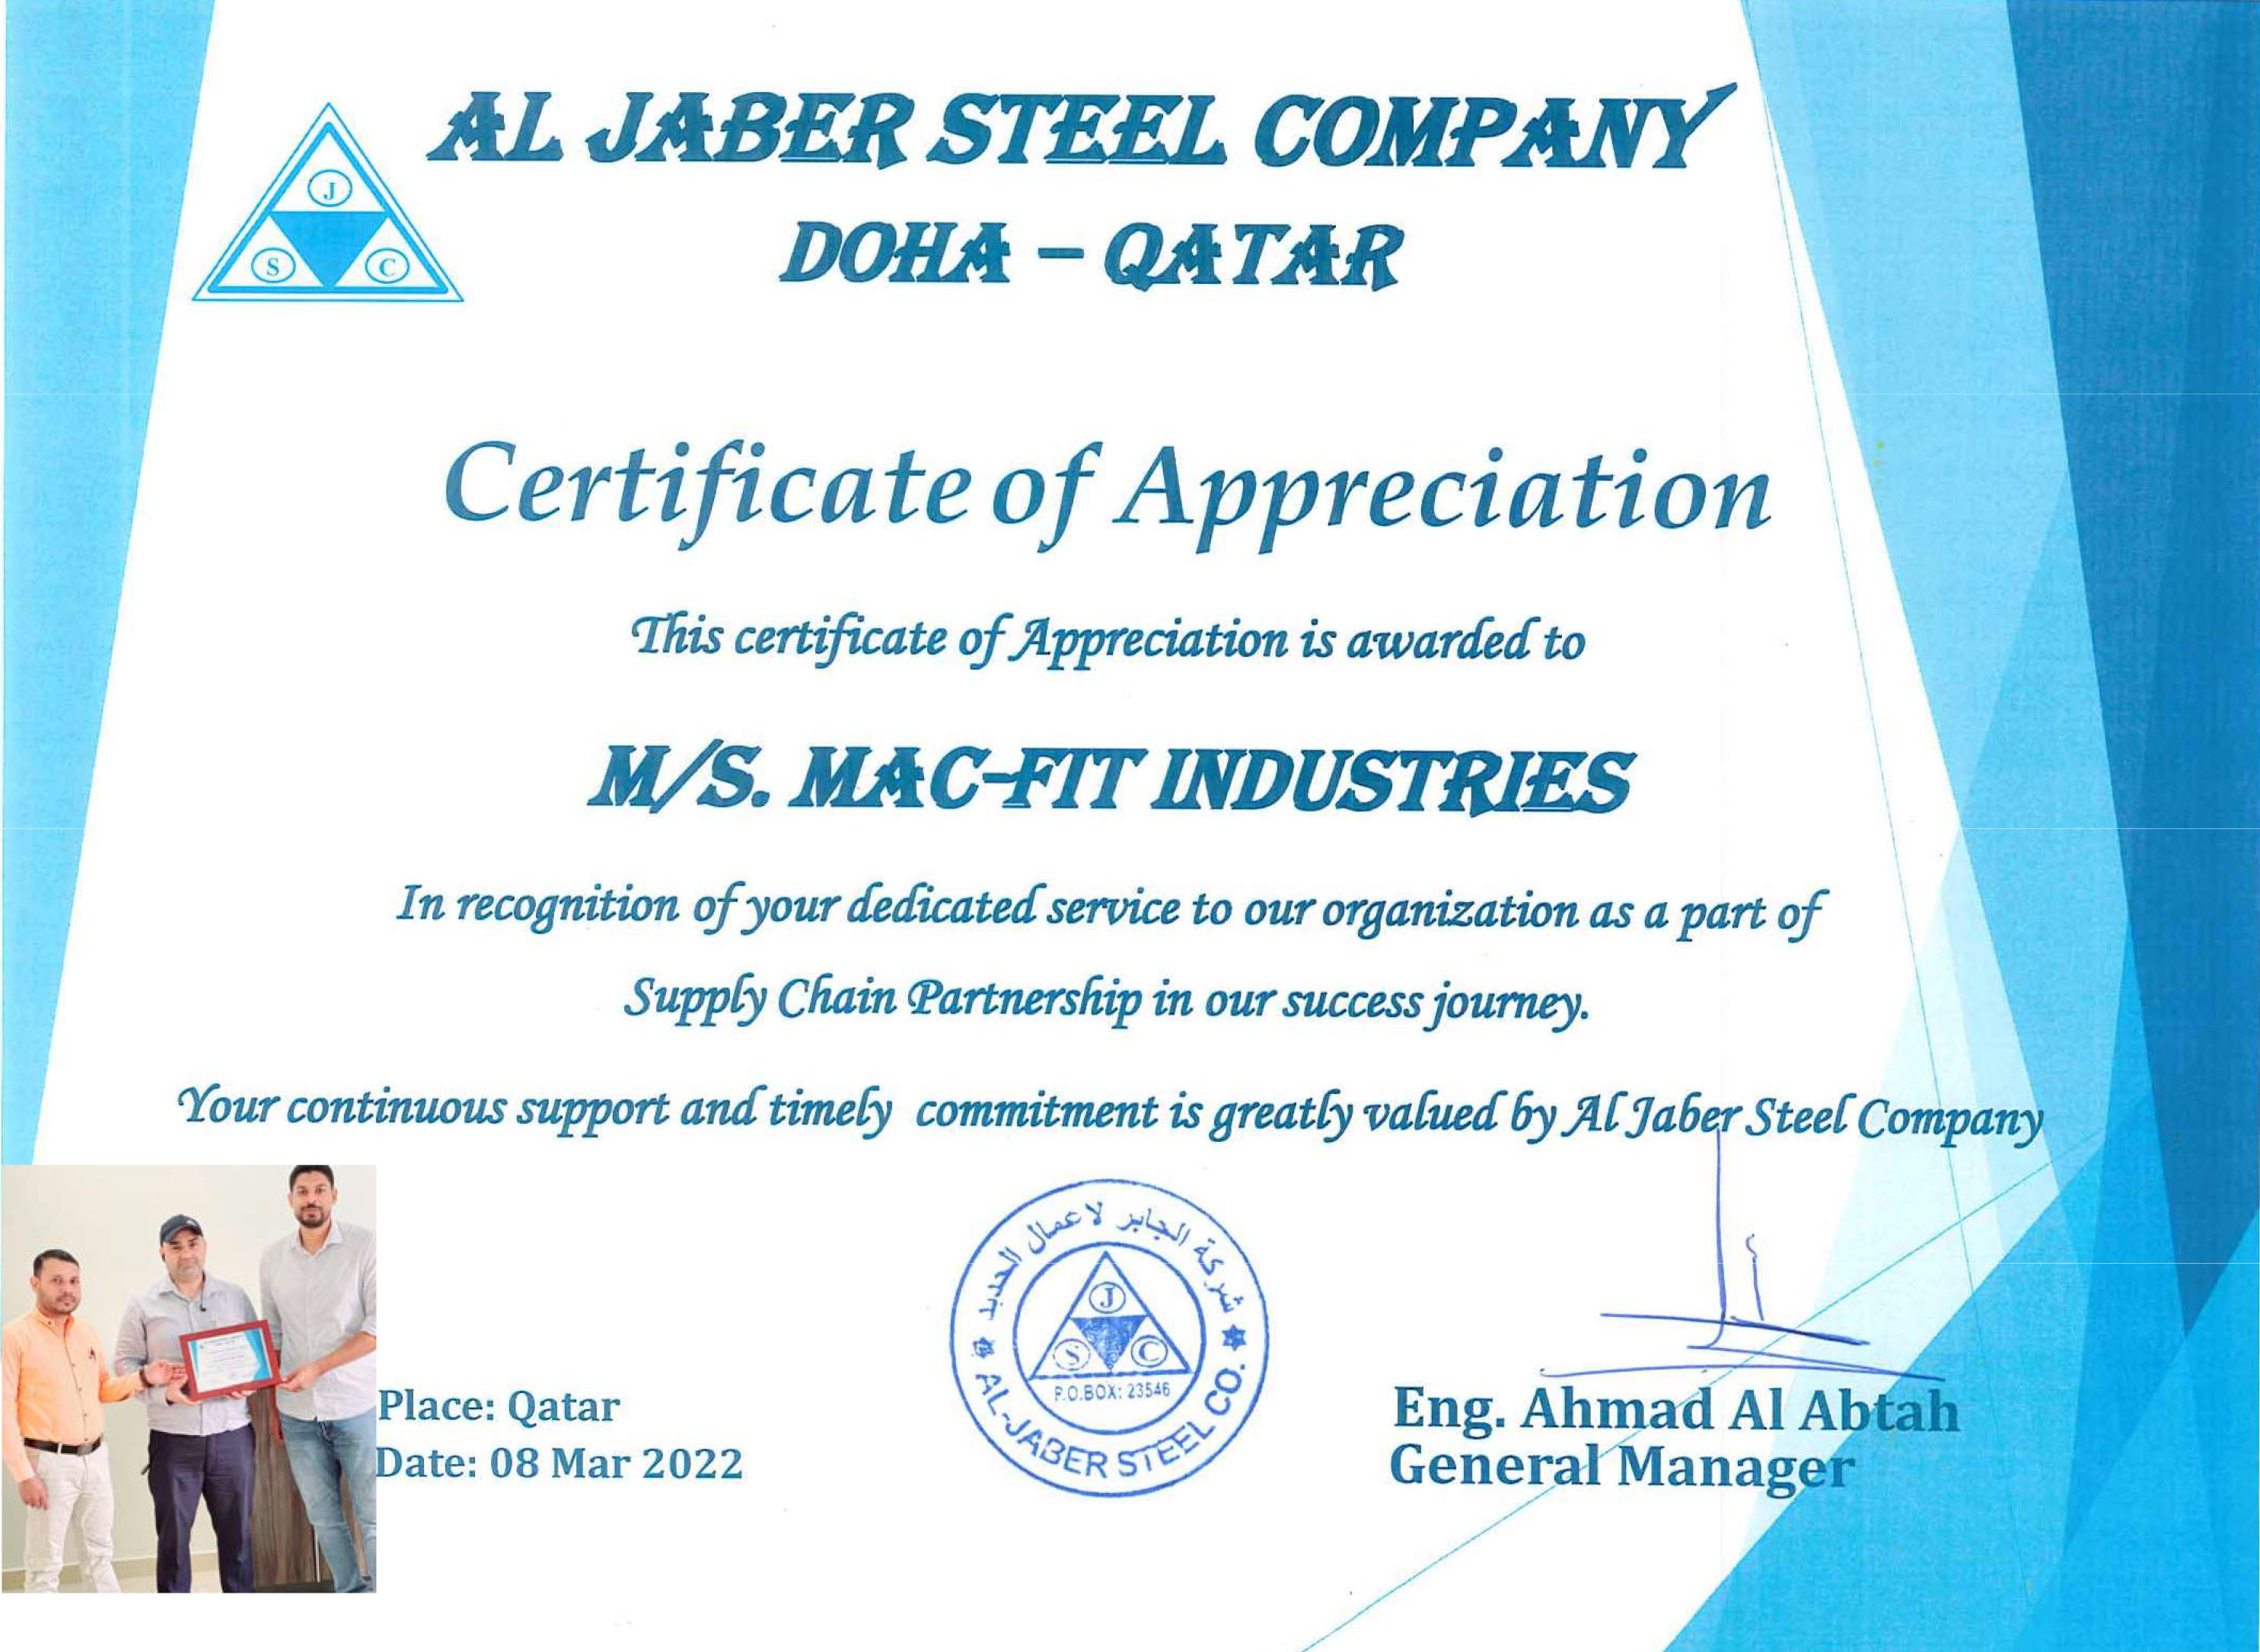 Al Jaber Steel Company - Certificate of appreciation to Mac-Fit Industries for dedicated service